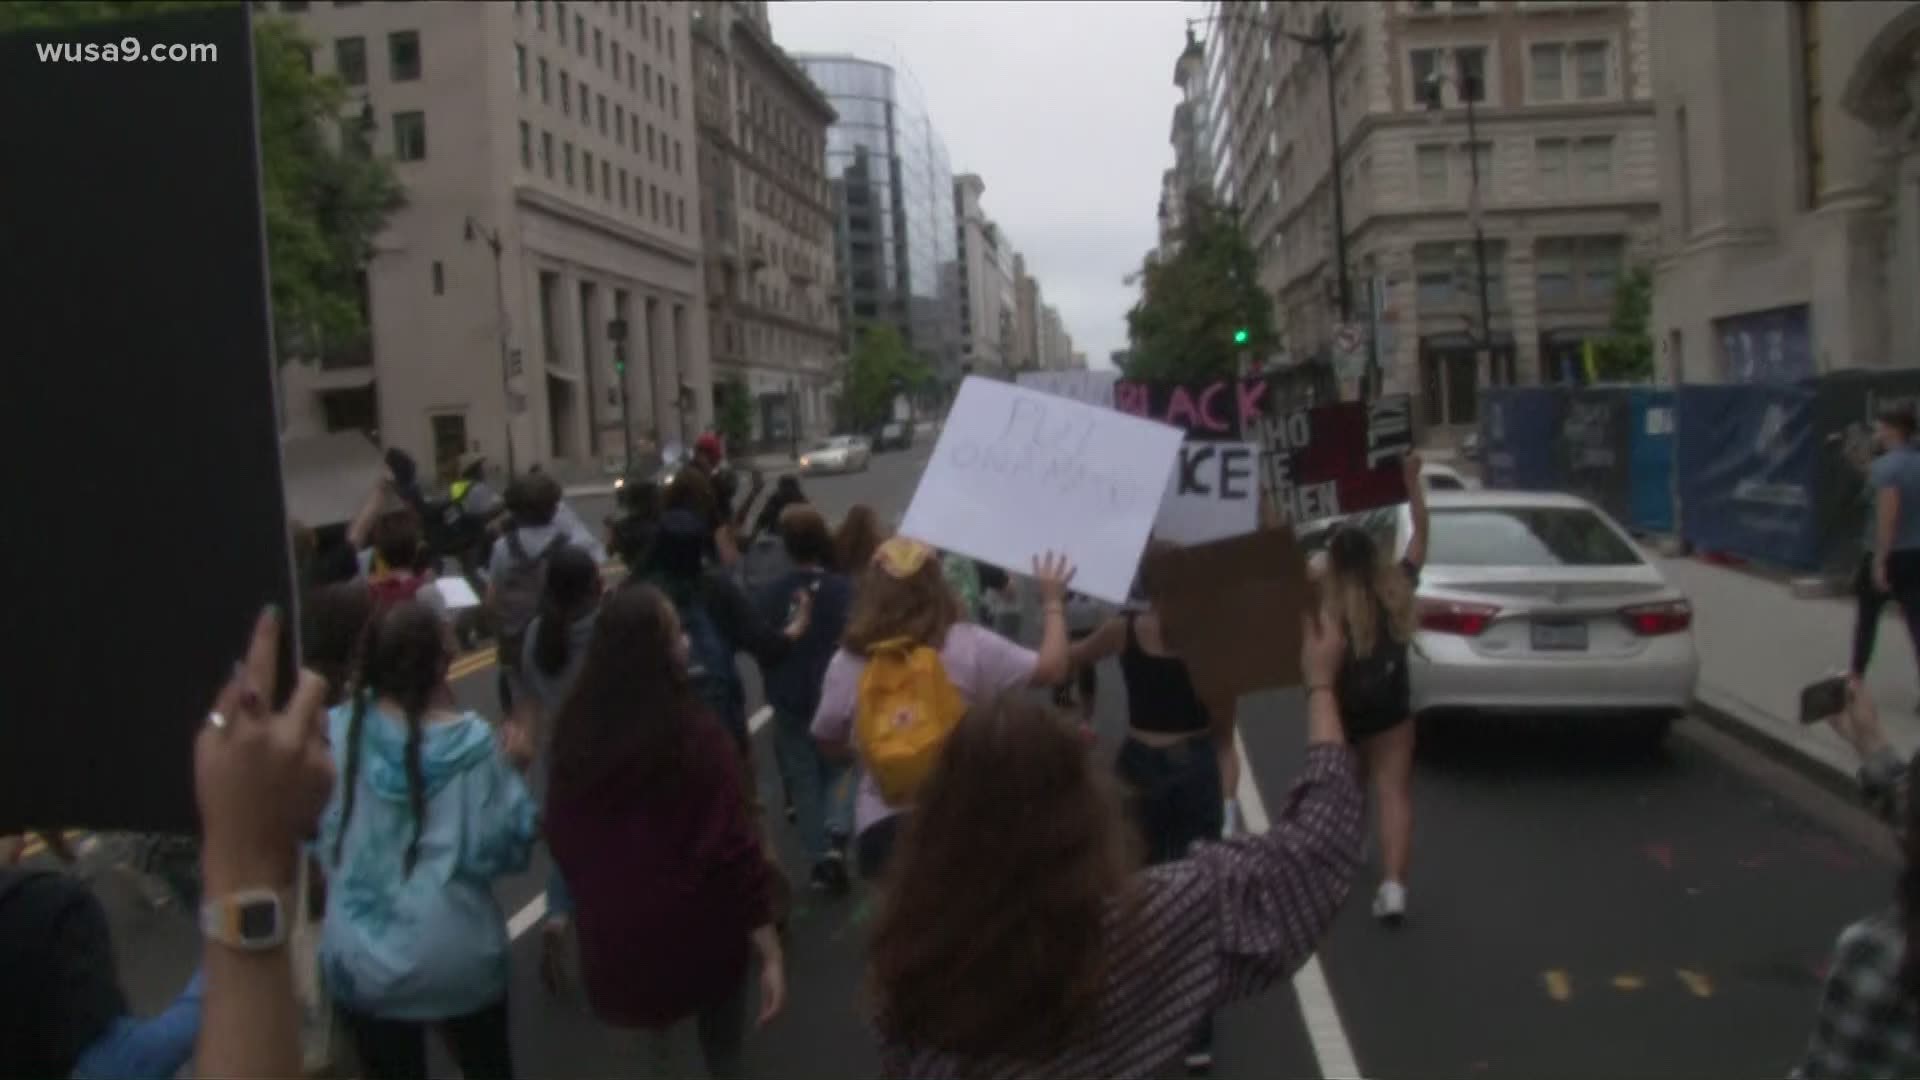 Youth-led march in support of BLM movement | wusa9.com